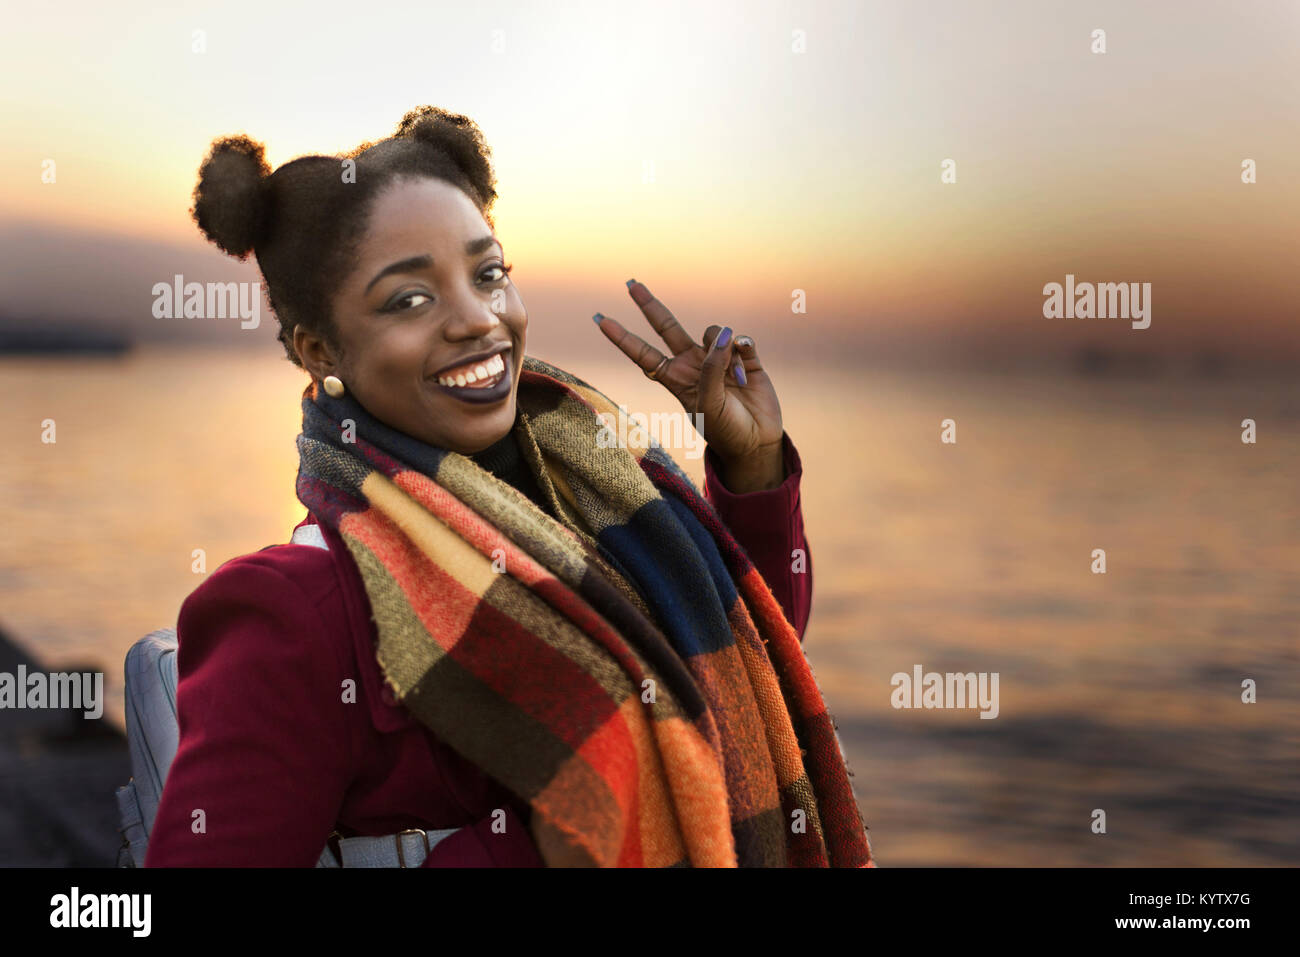 Portrait of a 25 years old African woman. Stock Photo